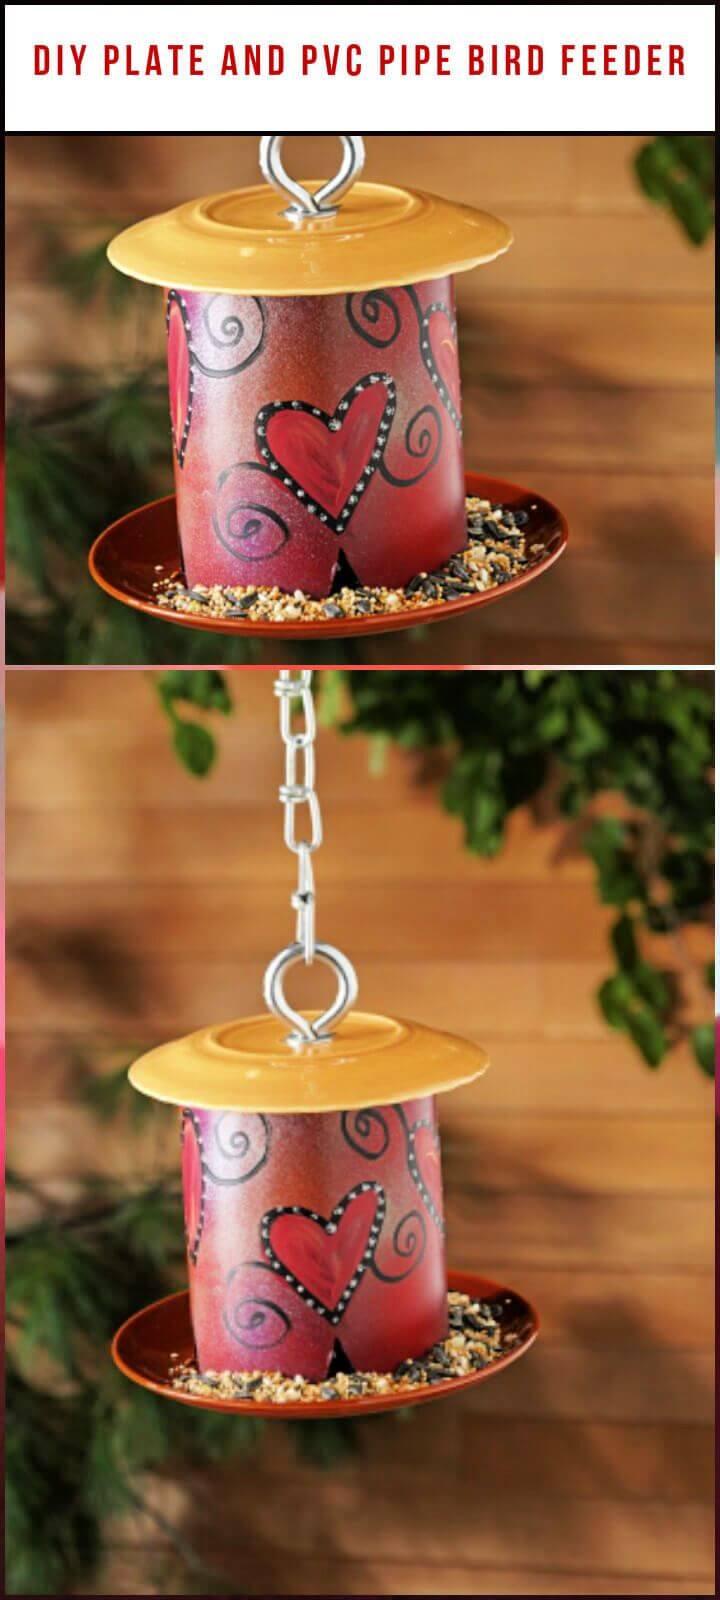 DIY Plate and PVC Pipe Bird Feeder 1